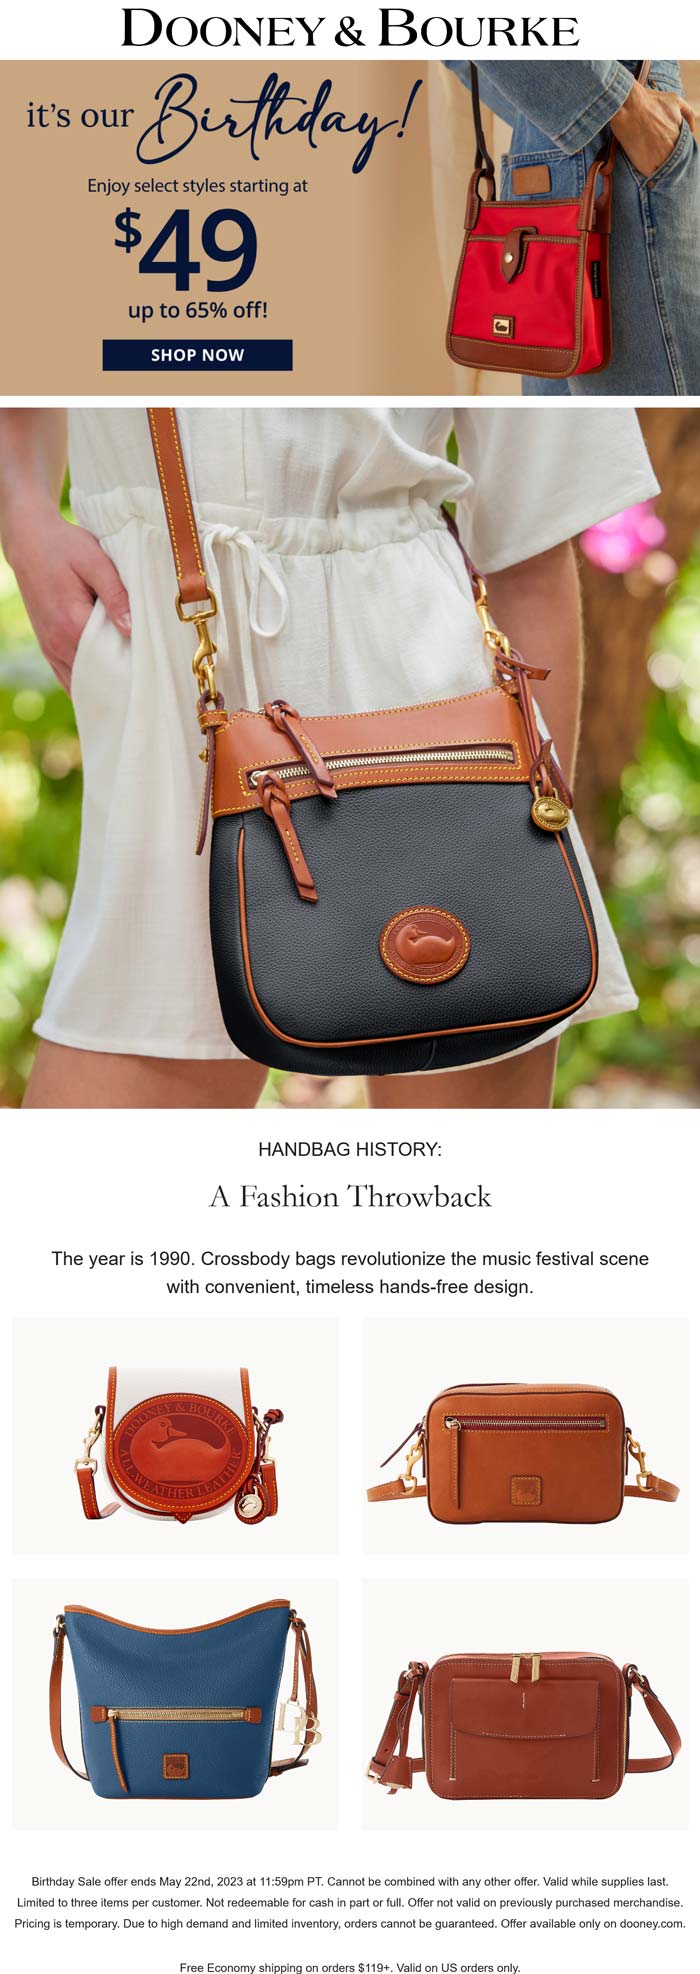 Dooney & Bourke stores Coupon  Various $49 styles today at Dooney & Bourke #dooneybourke 